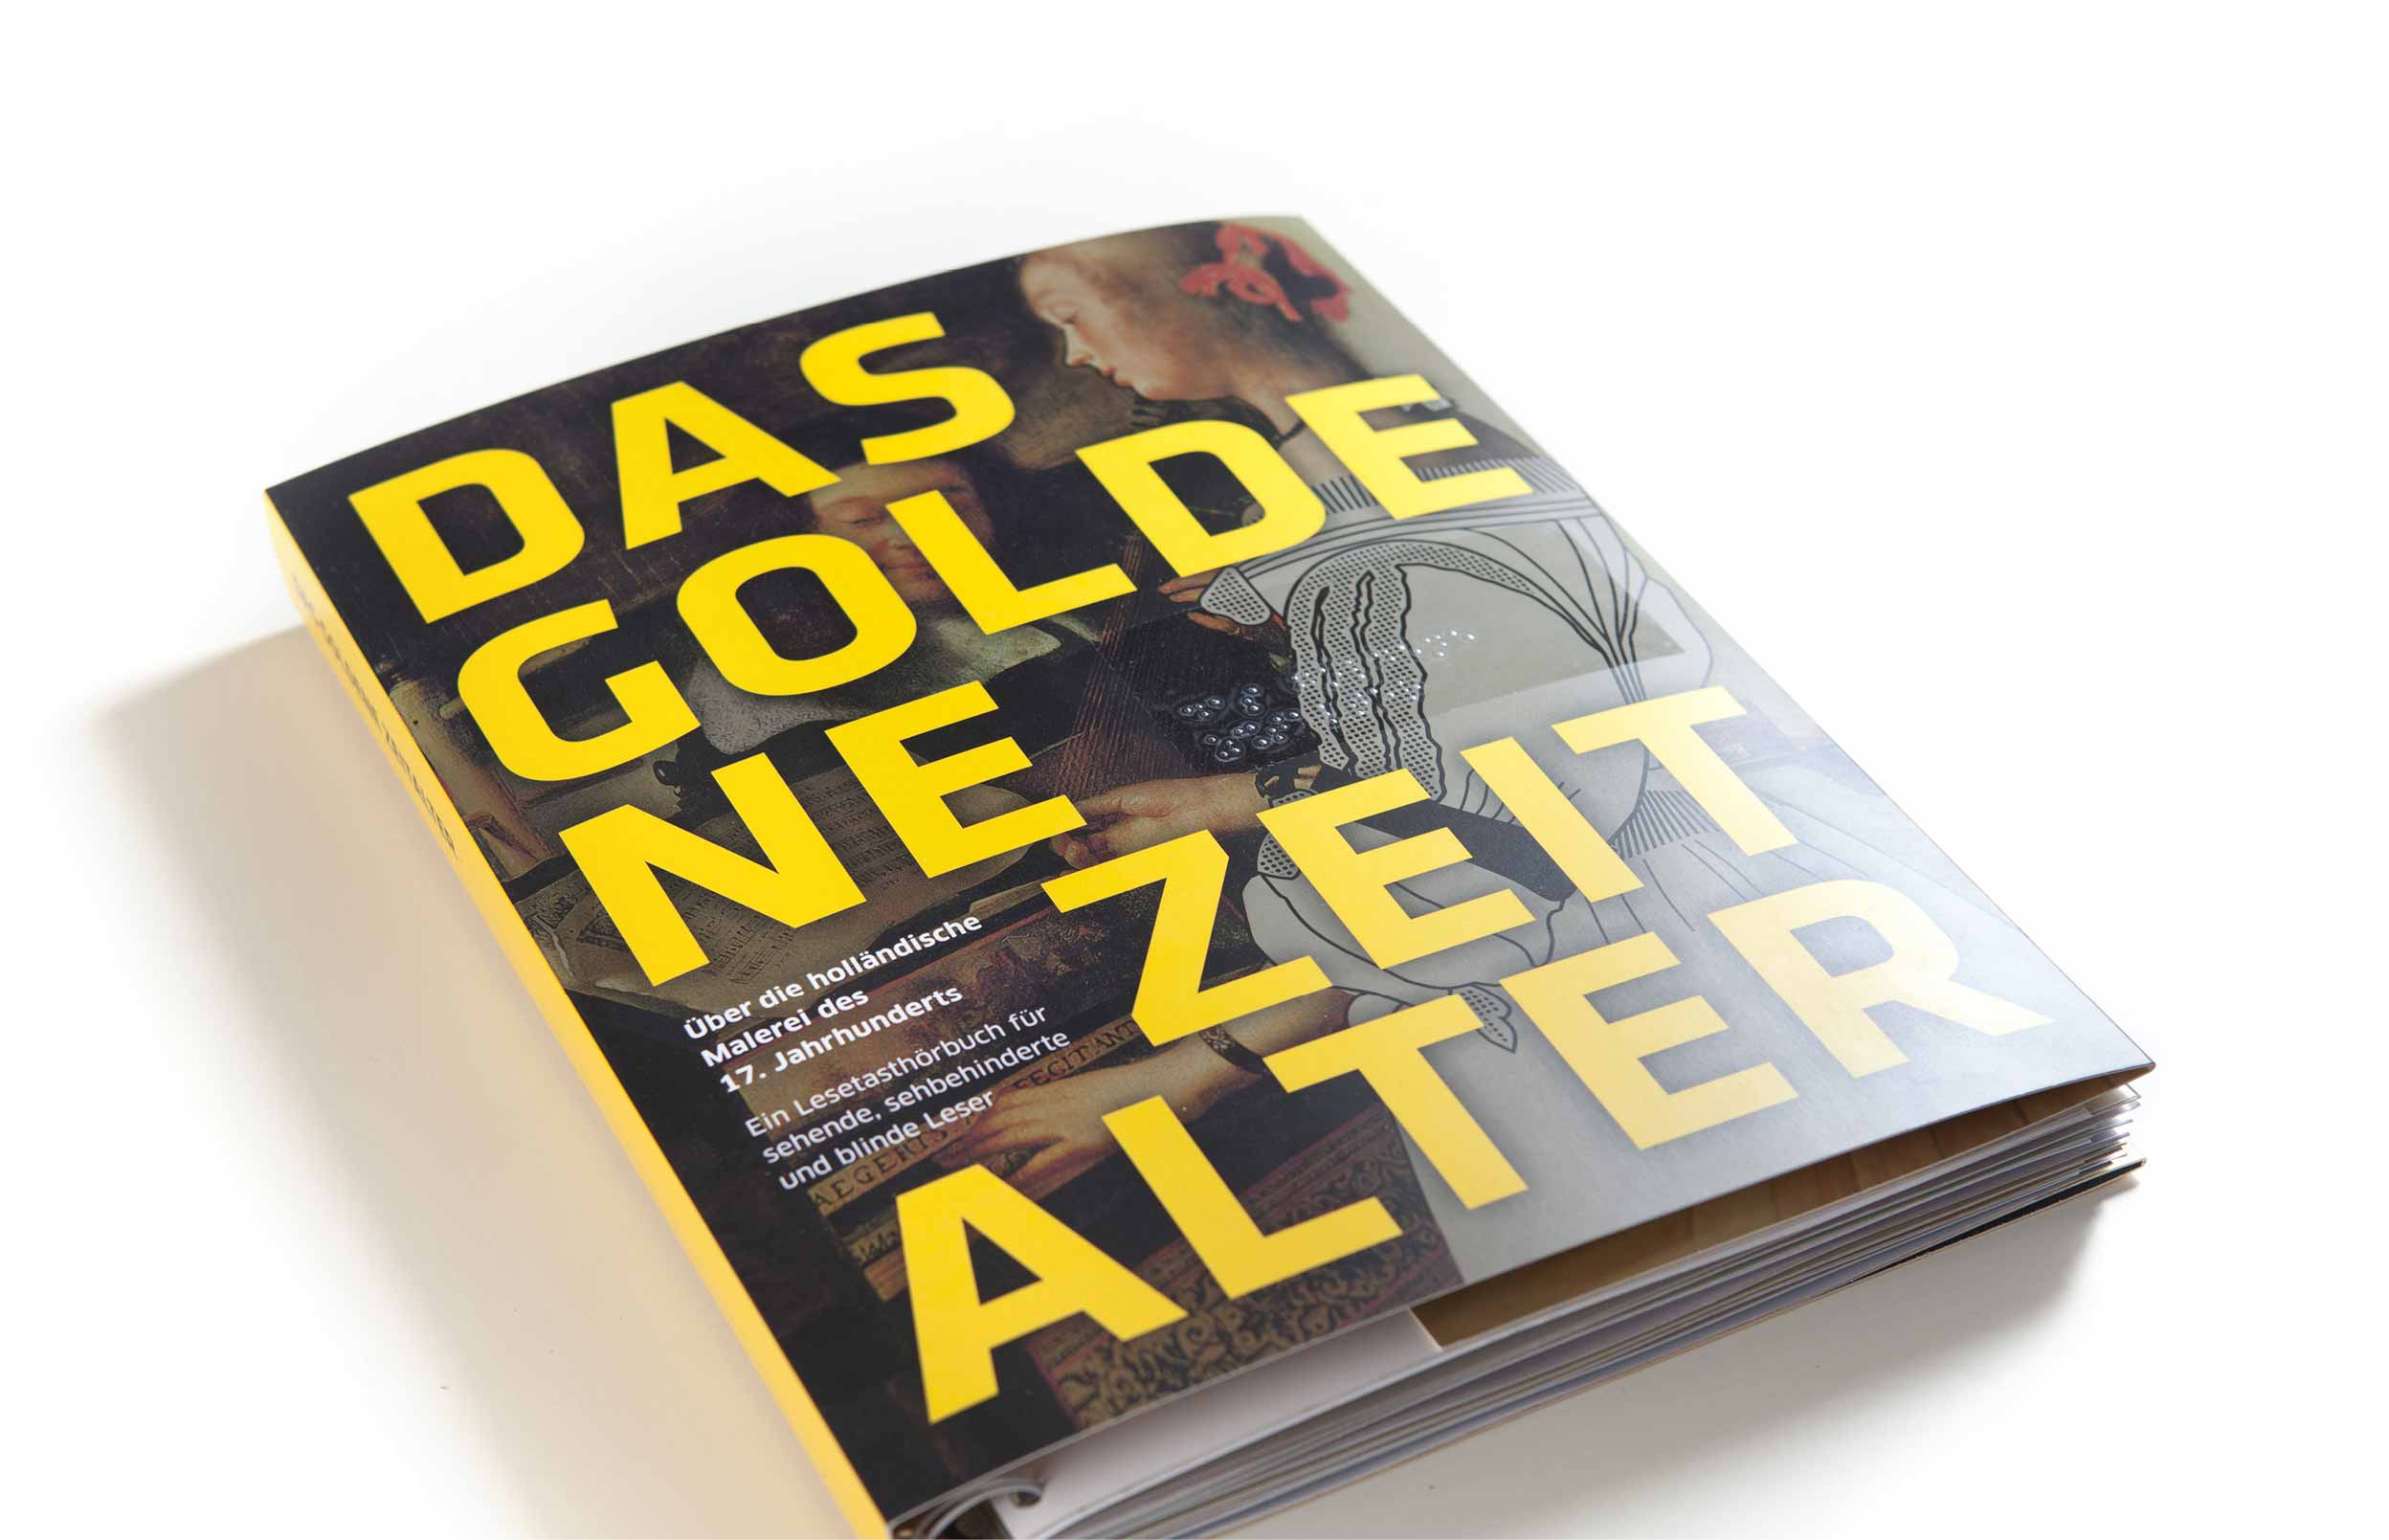 View of the title of the closed book lying on a white background. The title shows in the background, blurred and dark, a detail of the painting "Lady at the Harpsichord". On it, in large sun-yellow letters, the title of the book: The Golden Age, which is also applied in Braille with the help of a sticker.